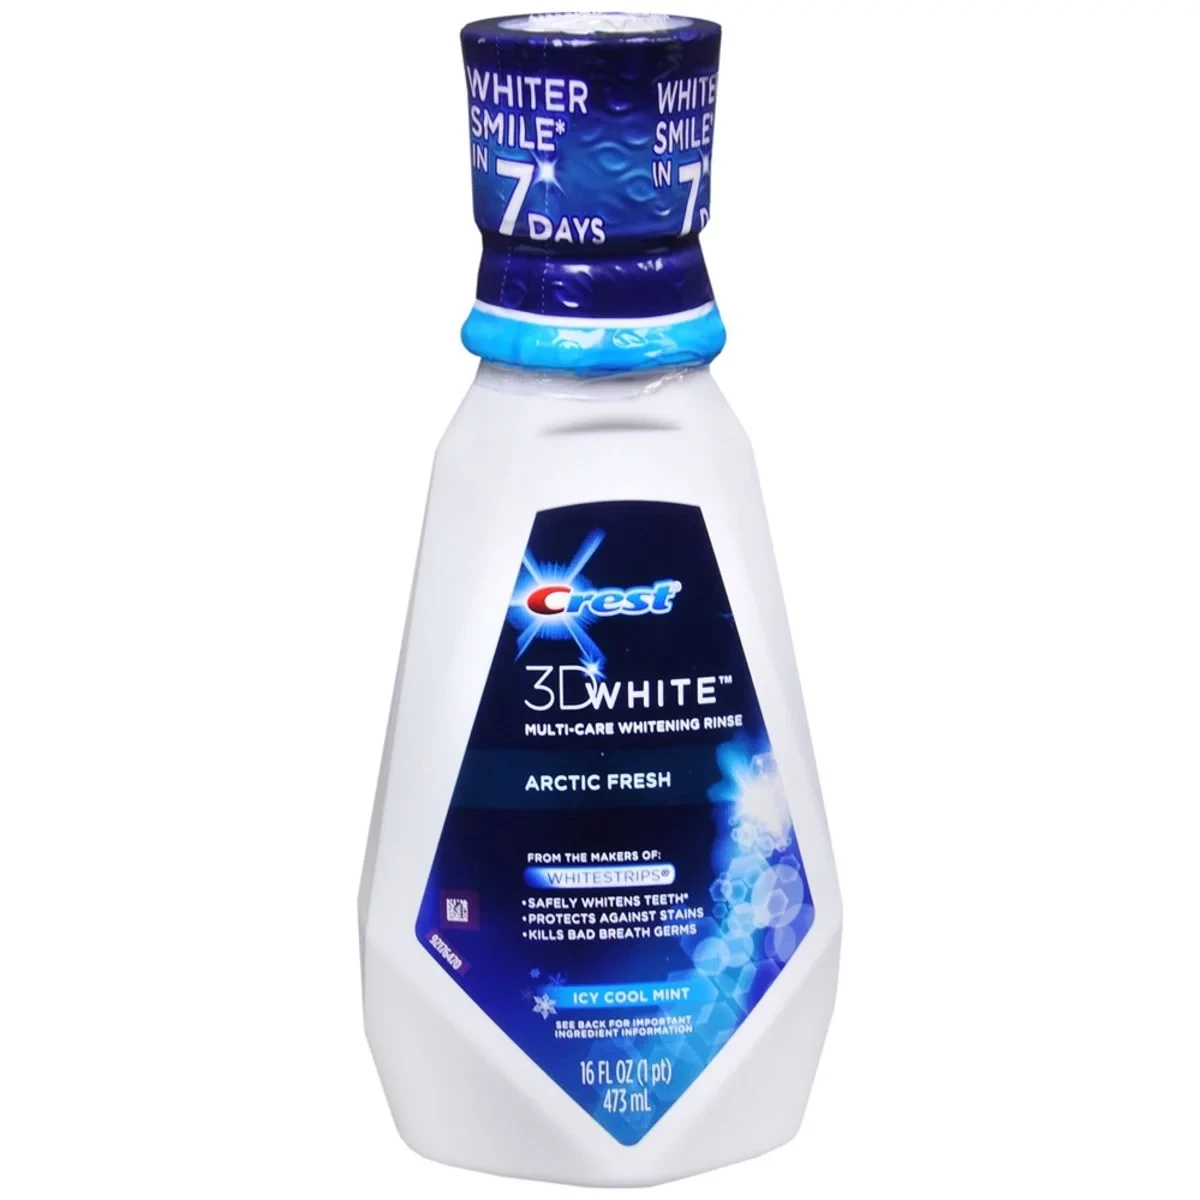 Crest 3D White Arctic Fresh Multi-Care Whitening Rinse, Icy Cool Mint 16 fl oz